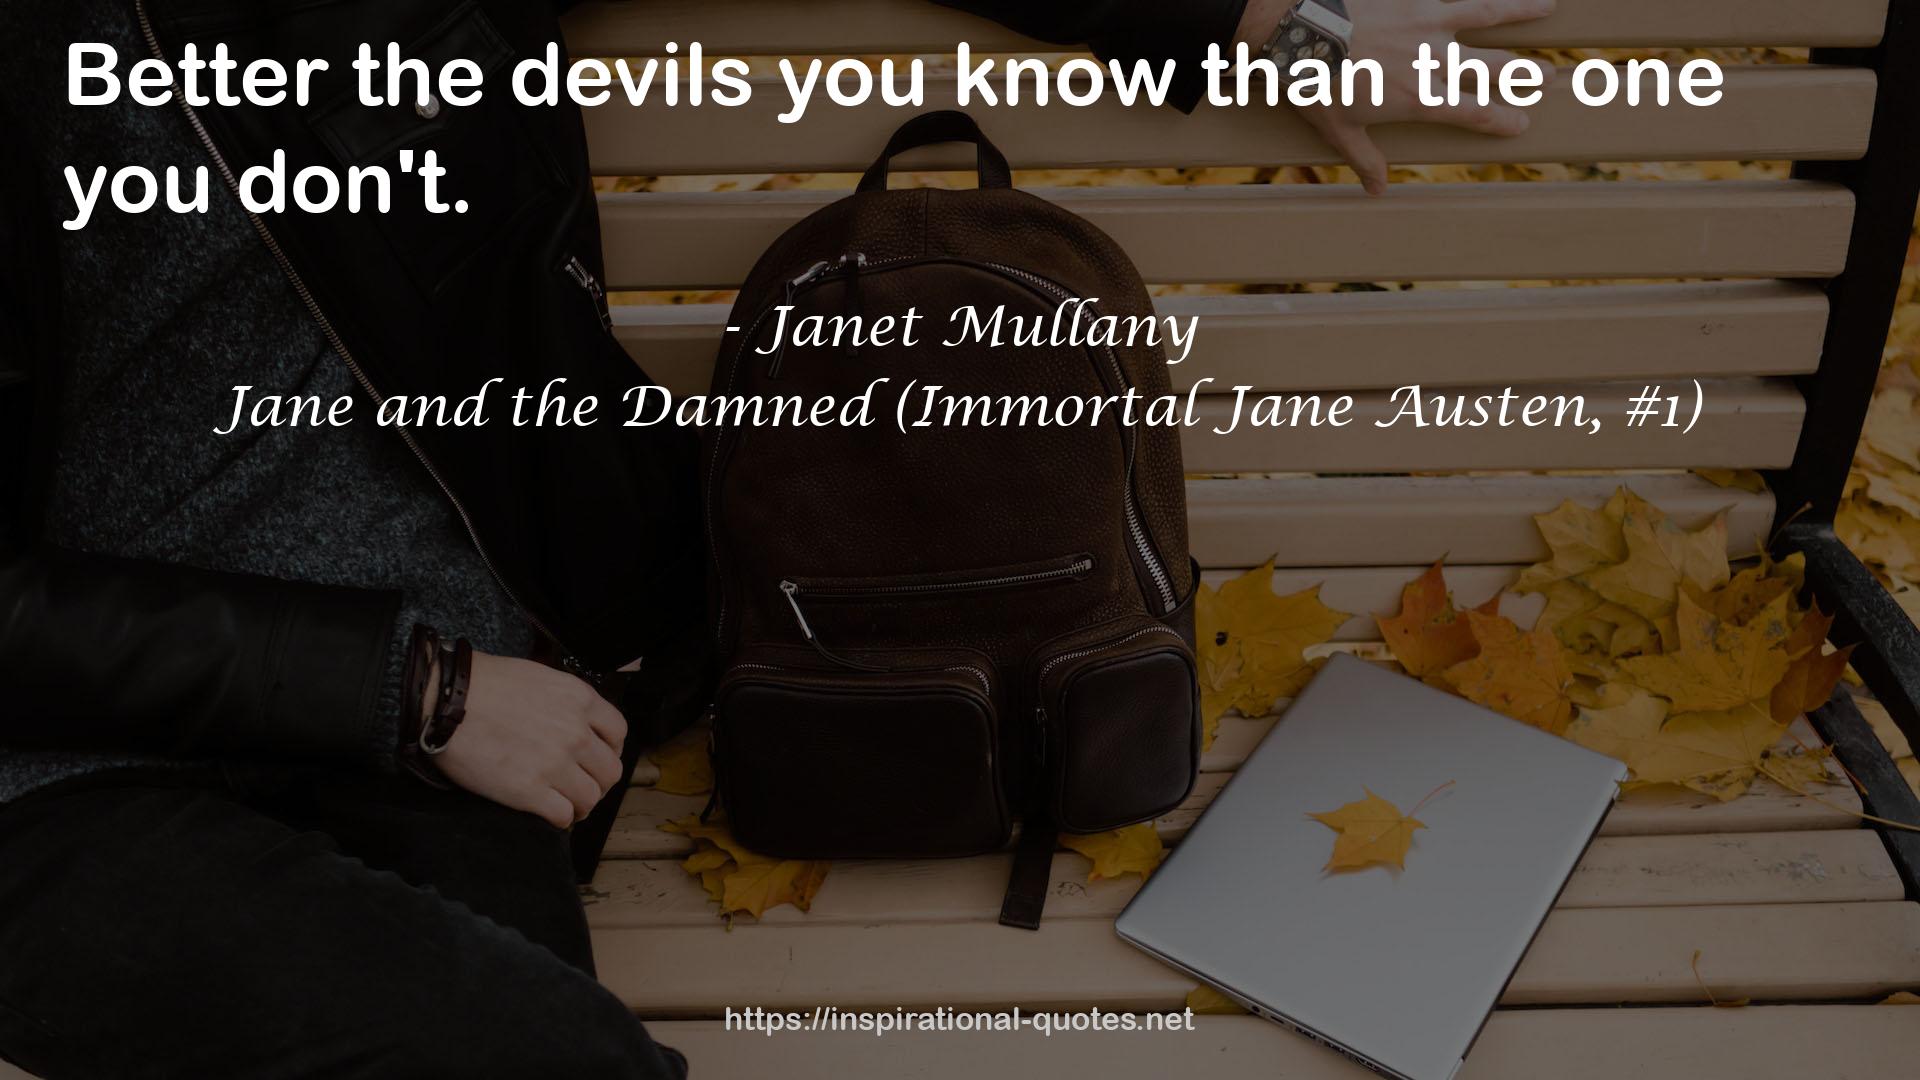 Jane and the Damned (Immortal Jane Austen, #1) QUOTES